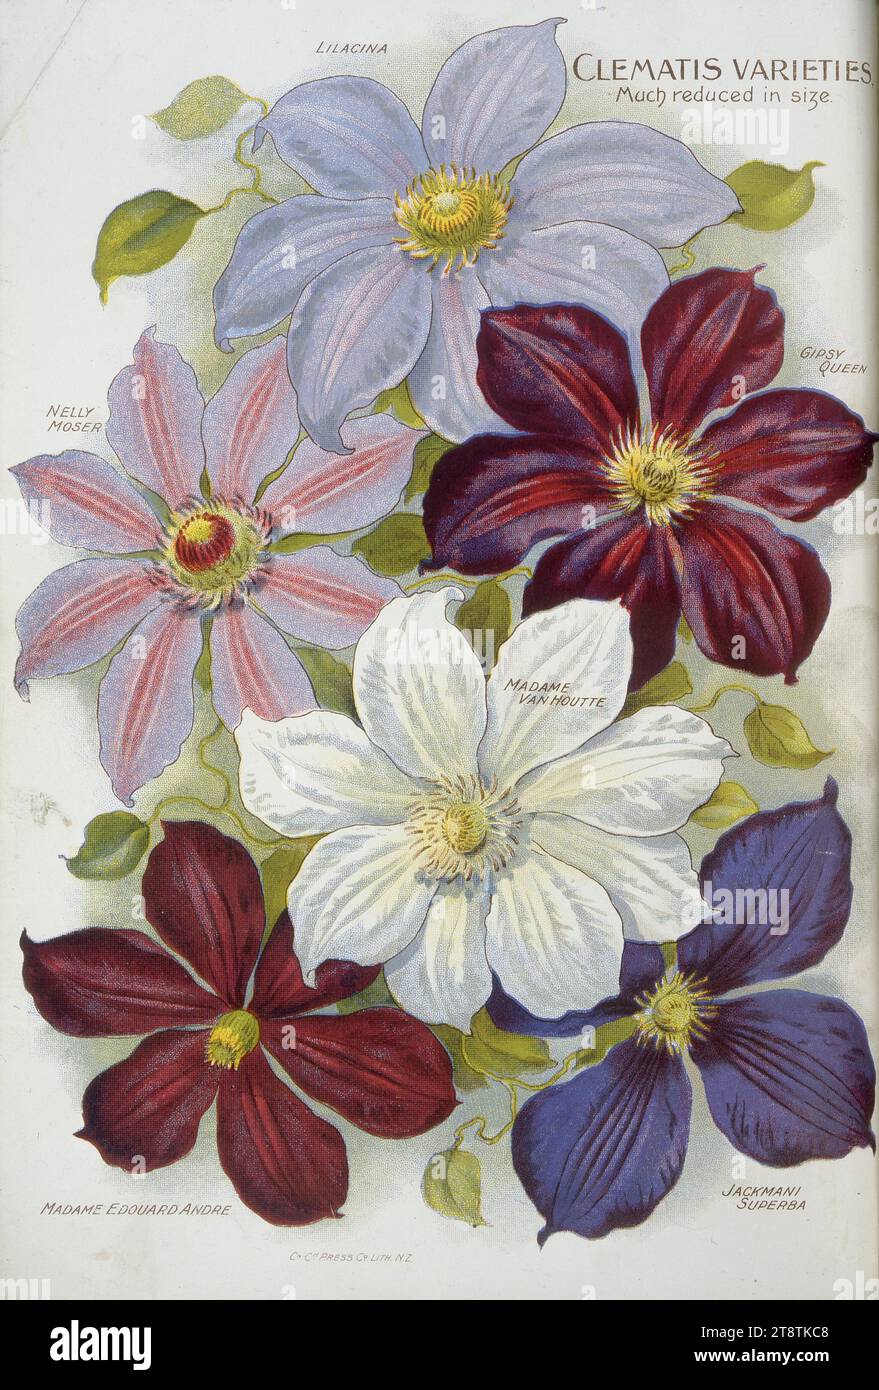 Nairn and Sons, Lincoln Road, Christchurch, New Zealand, N.Z.: Clematis varieties. 1906, Shows clematis varieties: Lilacina, Gipsy queen, Madame van Houtte, Jackmani superba, Madame Edouard Andre, Nelly Moser Stock Photo